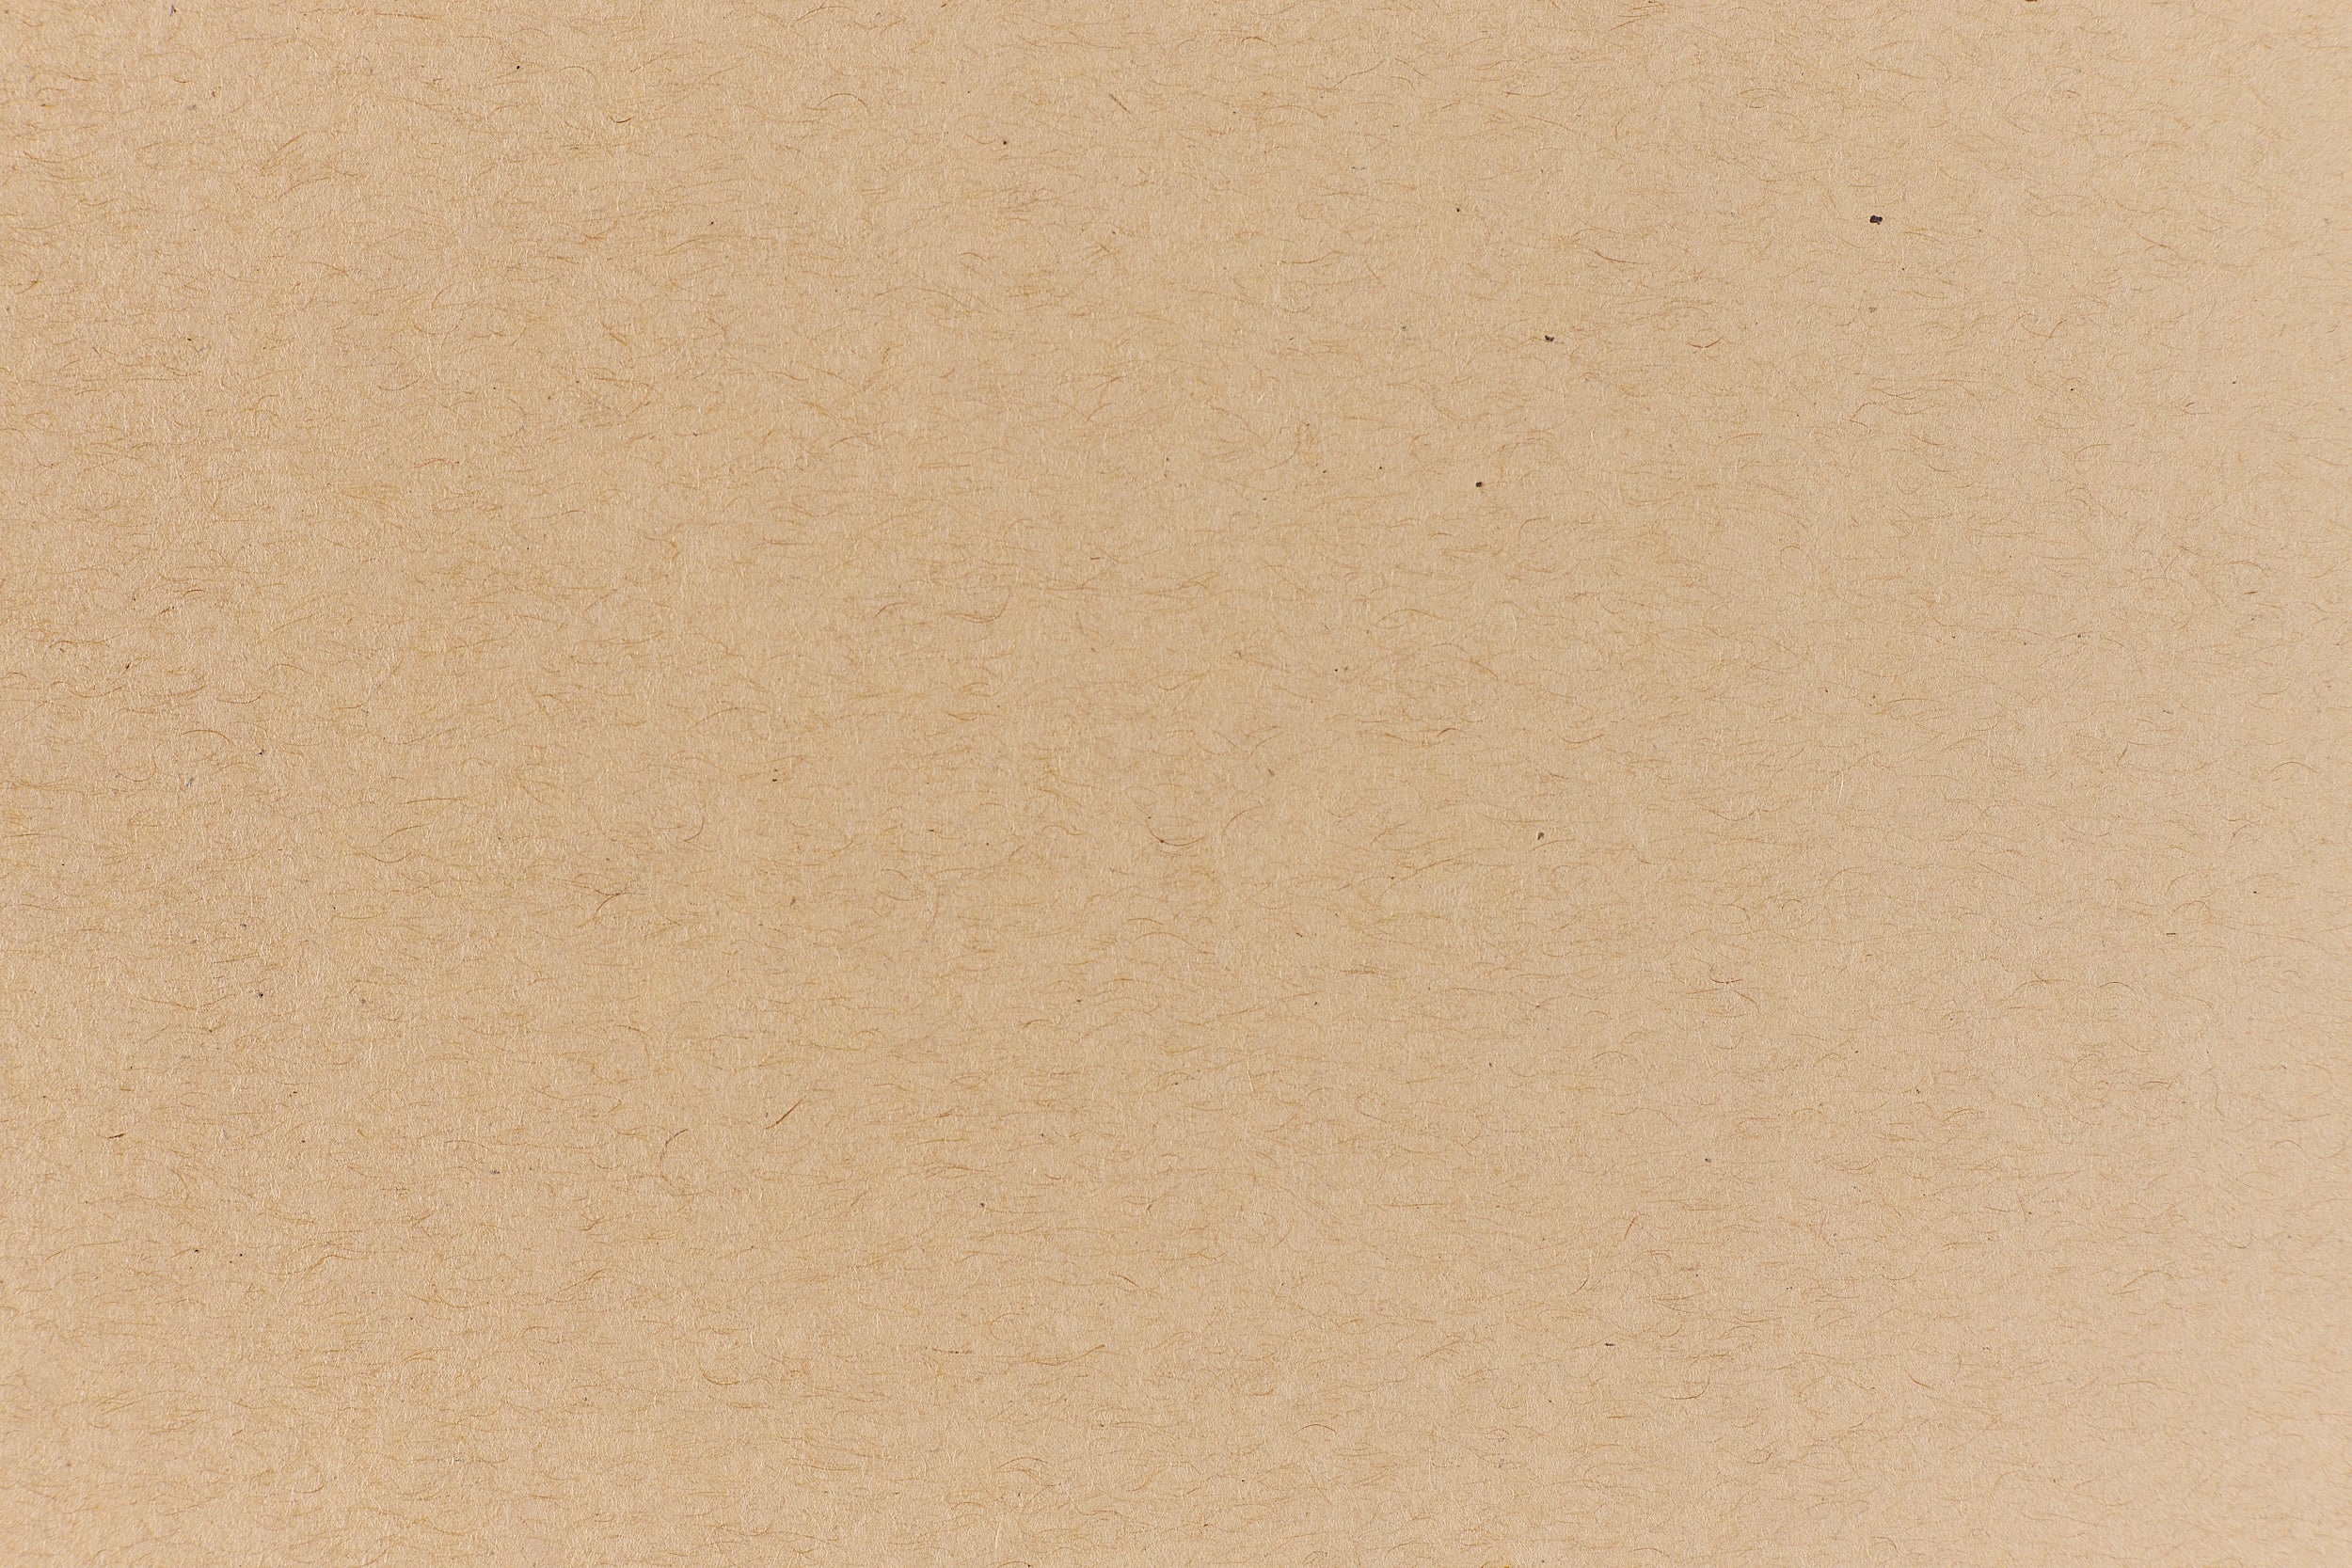 Whip Cream Cardstock - White over Weight - Pop-Tone – French Paper